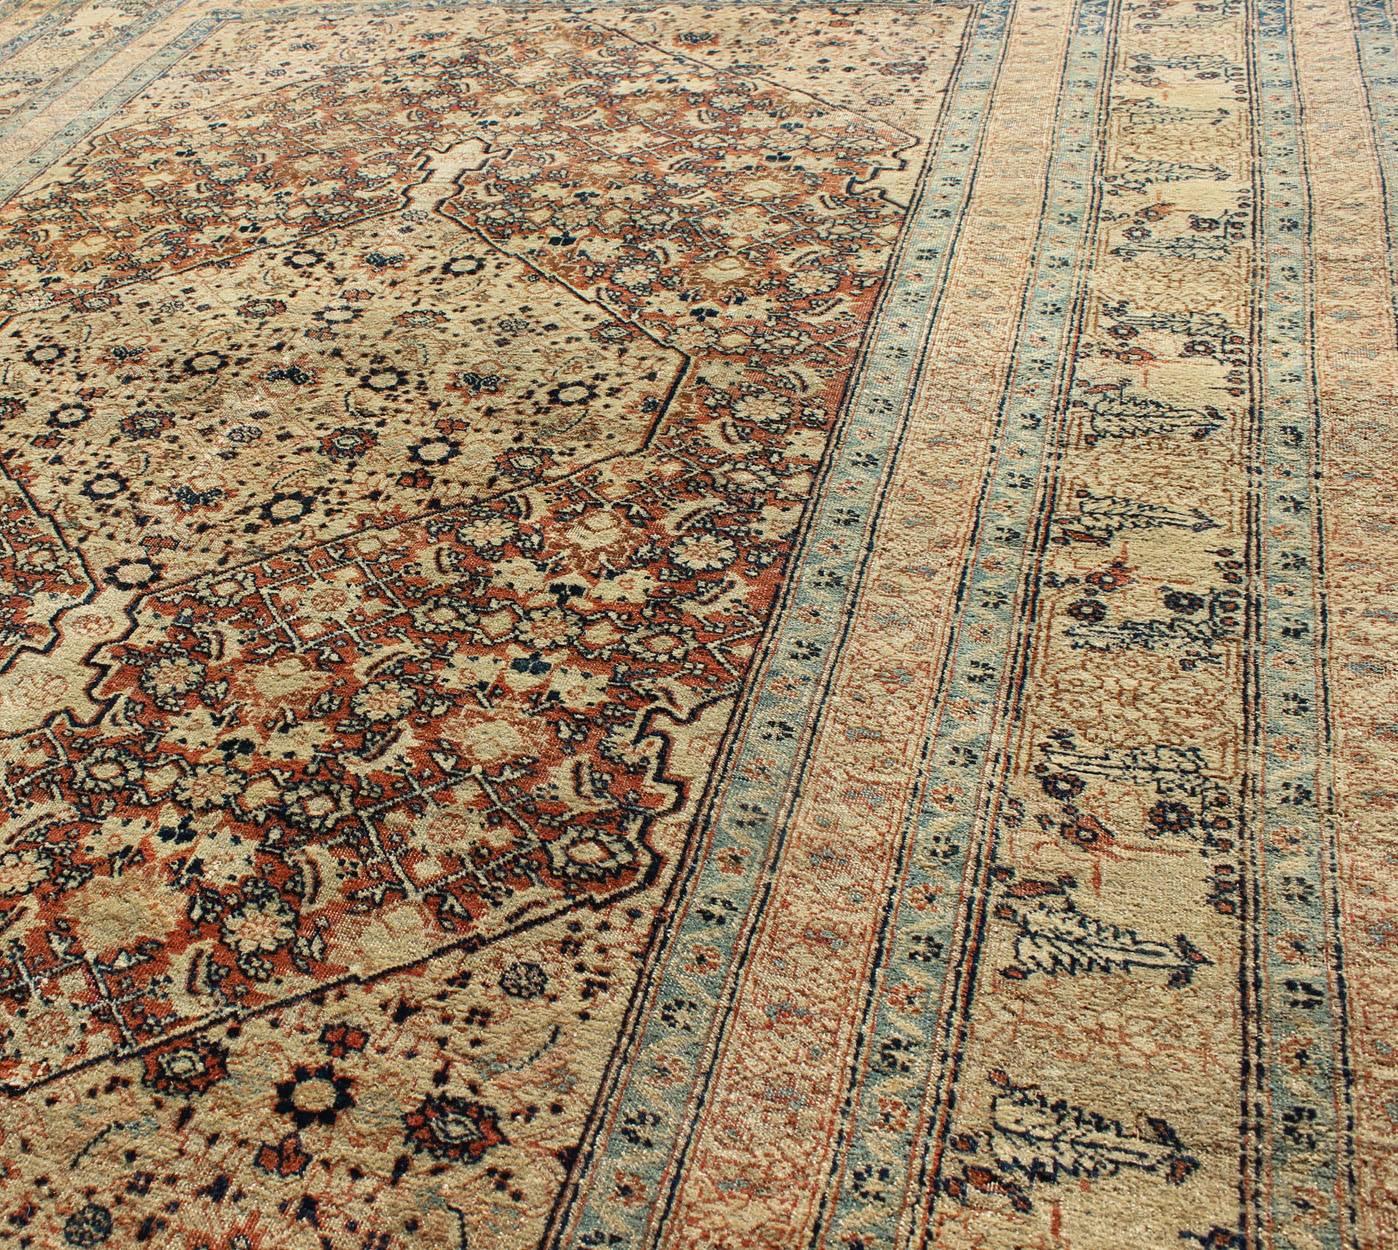 Late 19th Century Antique Persian Tabriz Haj Jalili Fine Rug in Earth tones, Red Brown Background For Sale